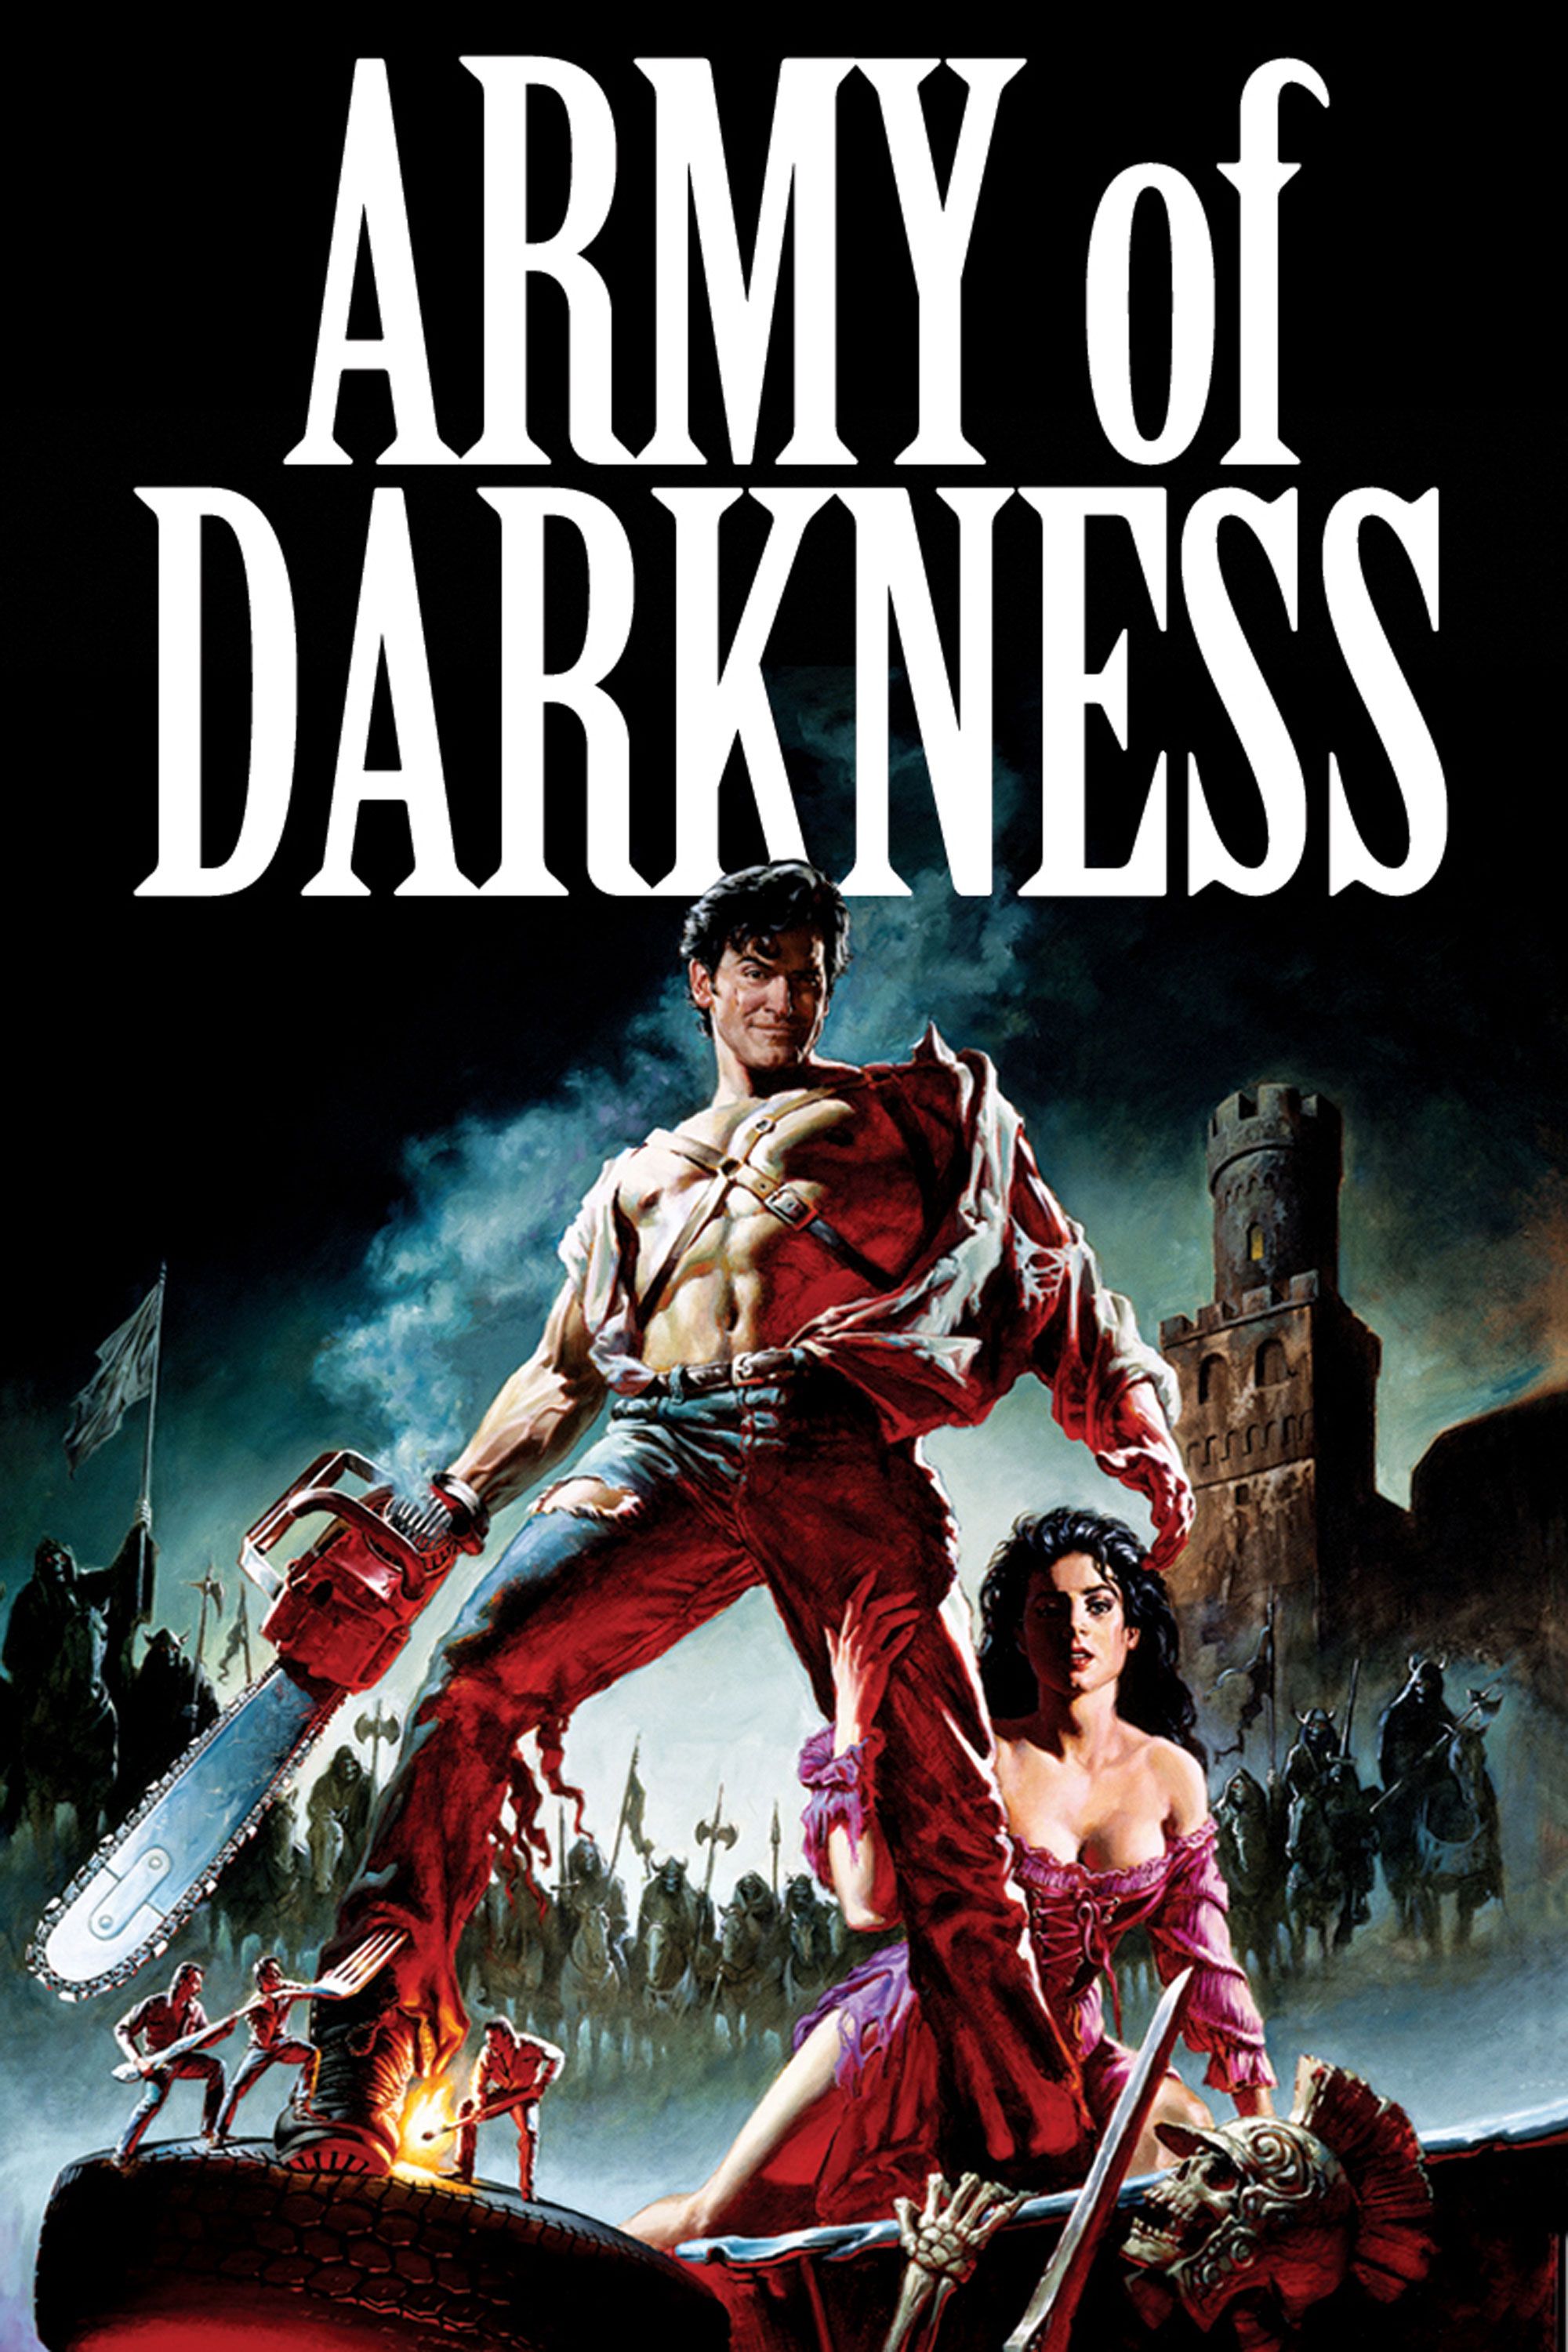 Army of Darkness” update launches today for Evil Dead: The Game